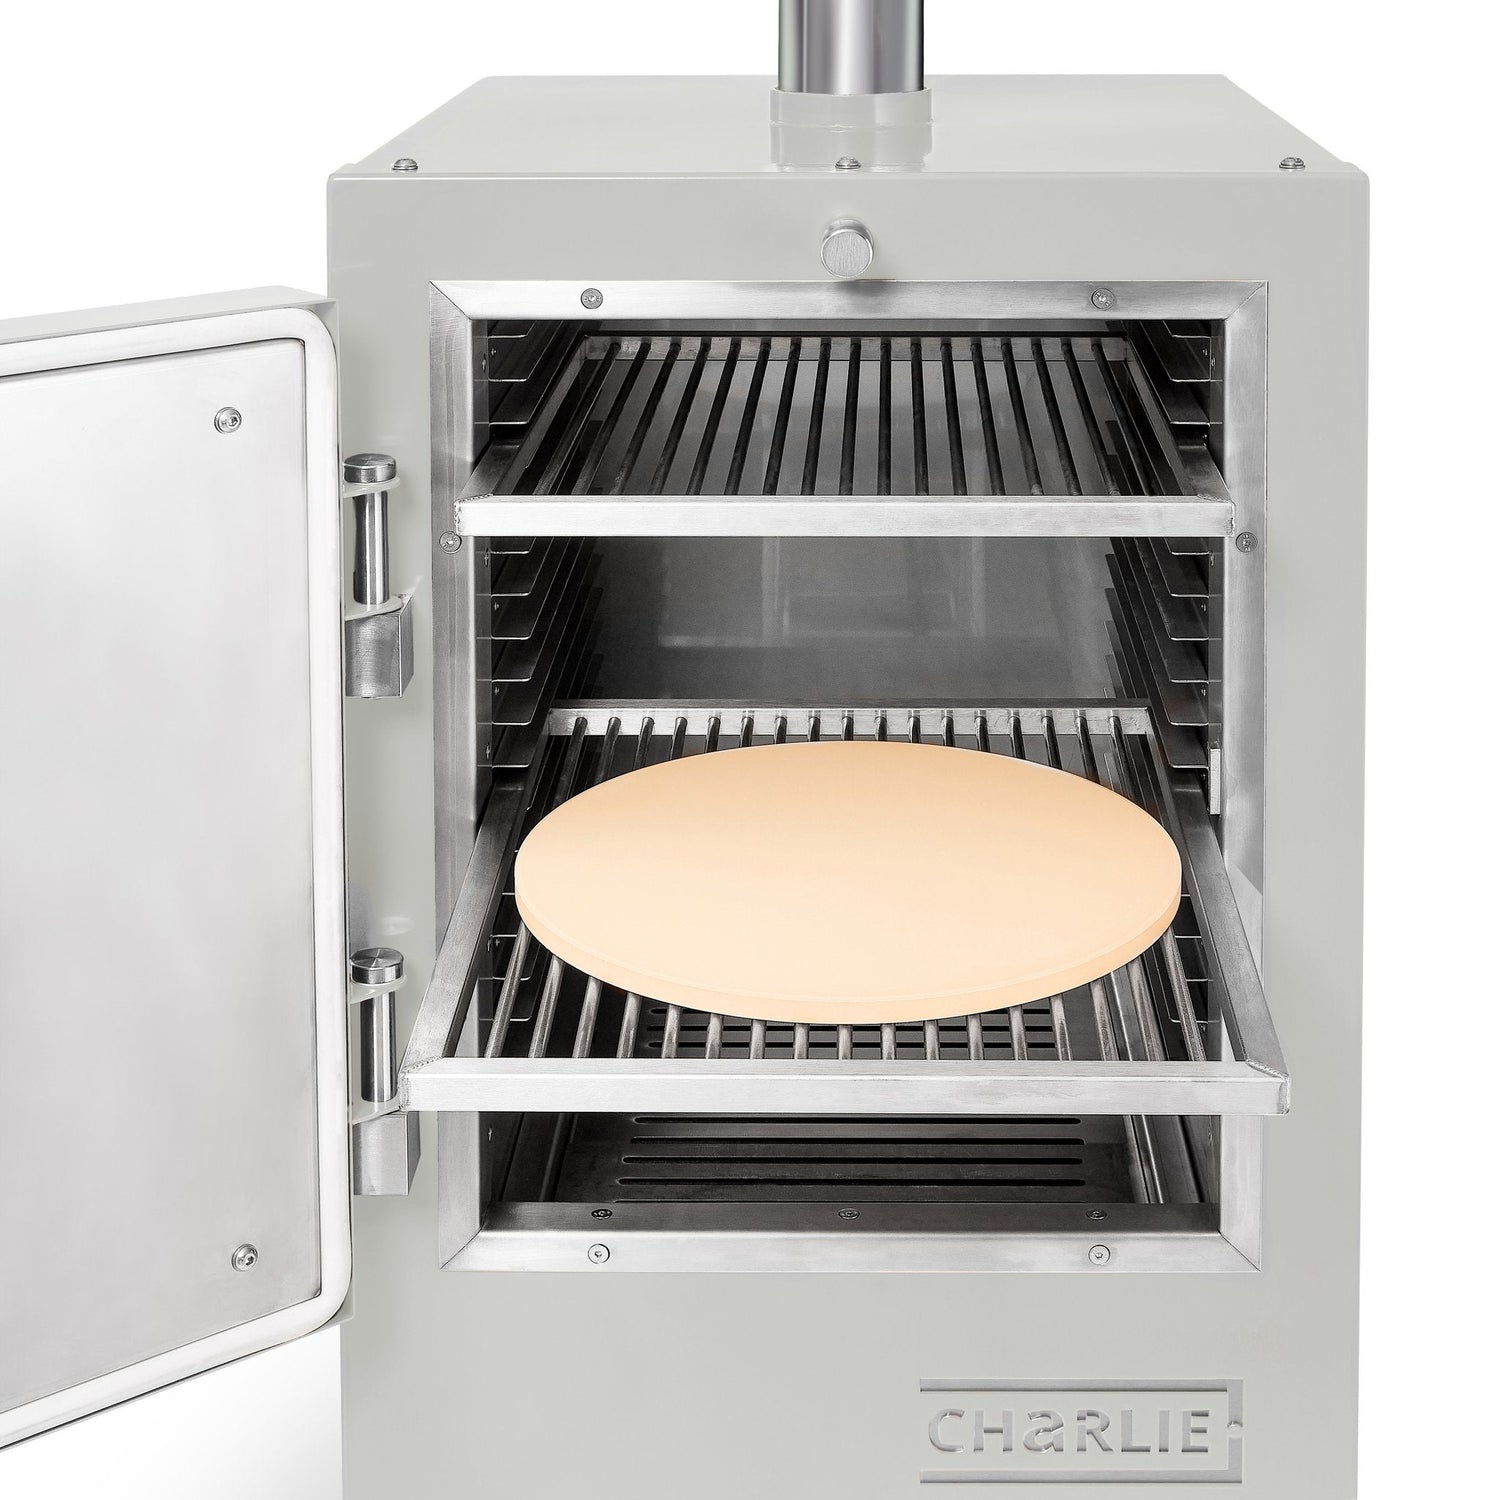 Charlie Charcoal Oven - Charlie Oven